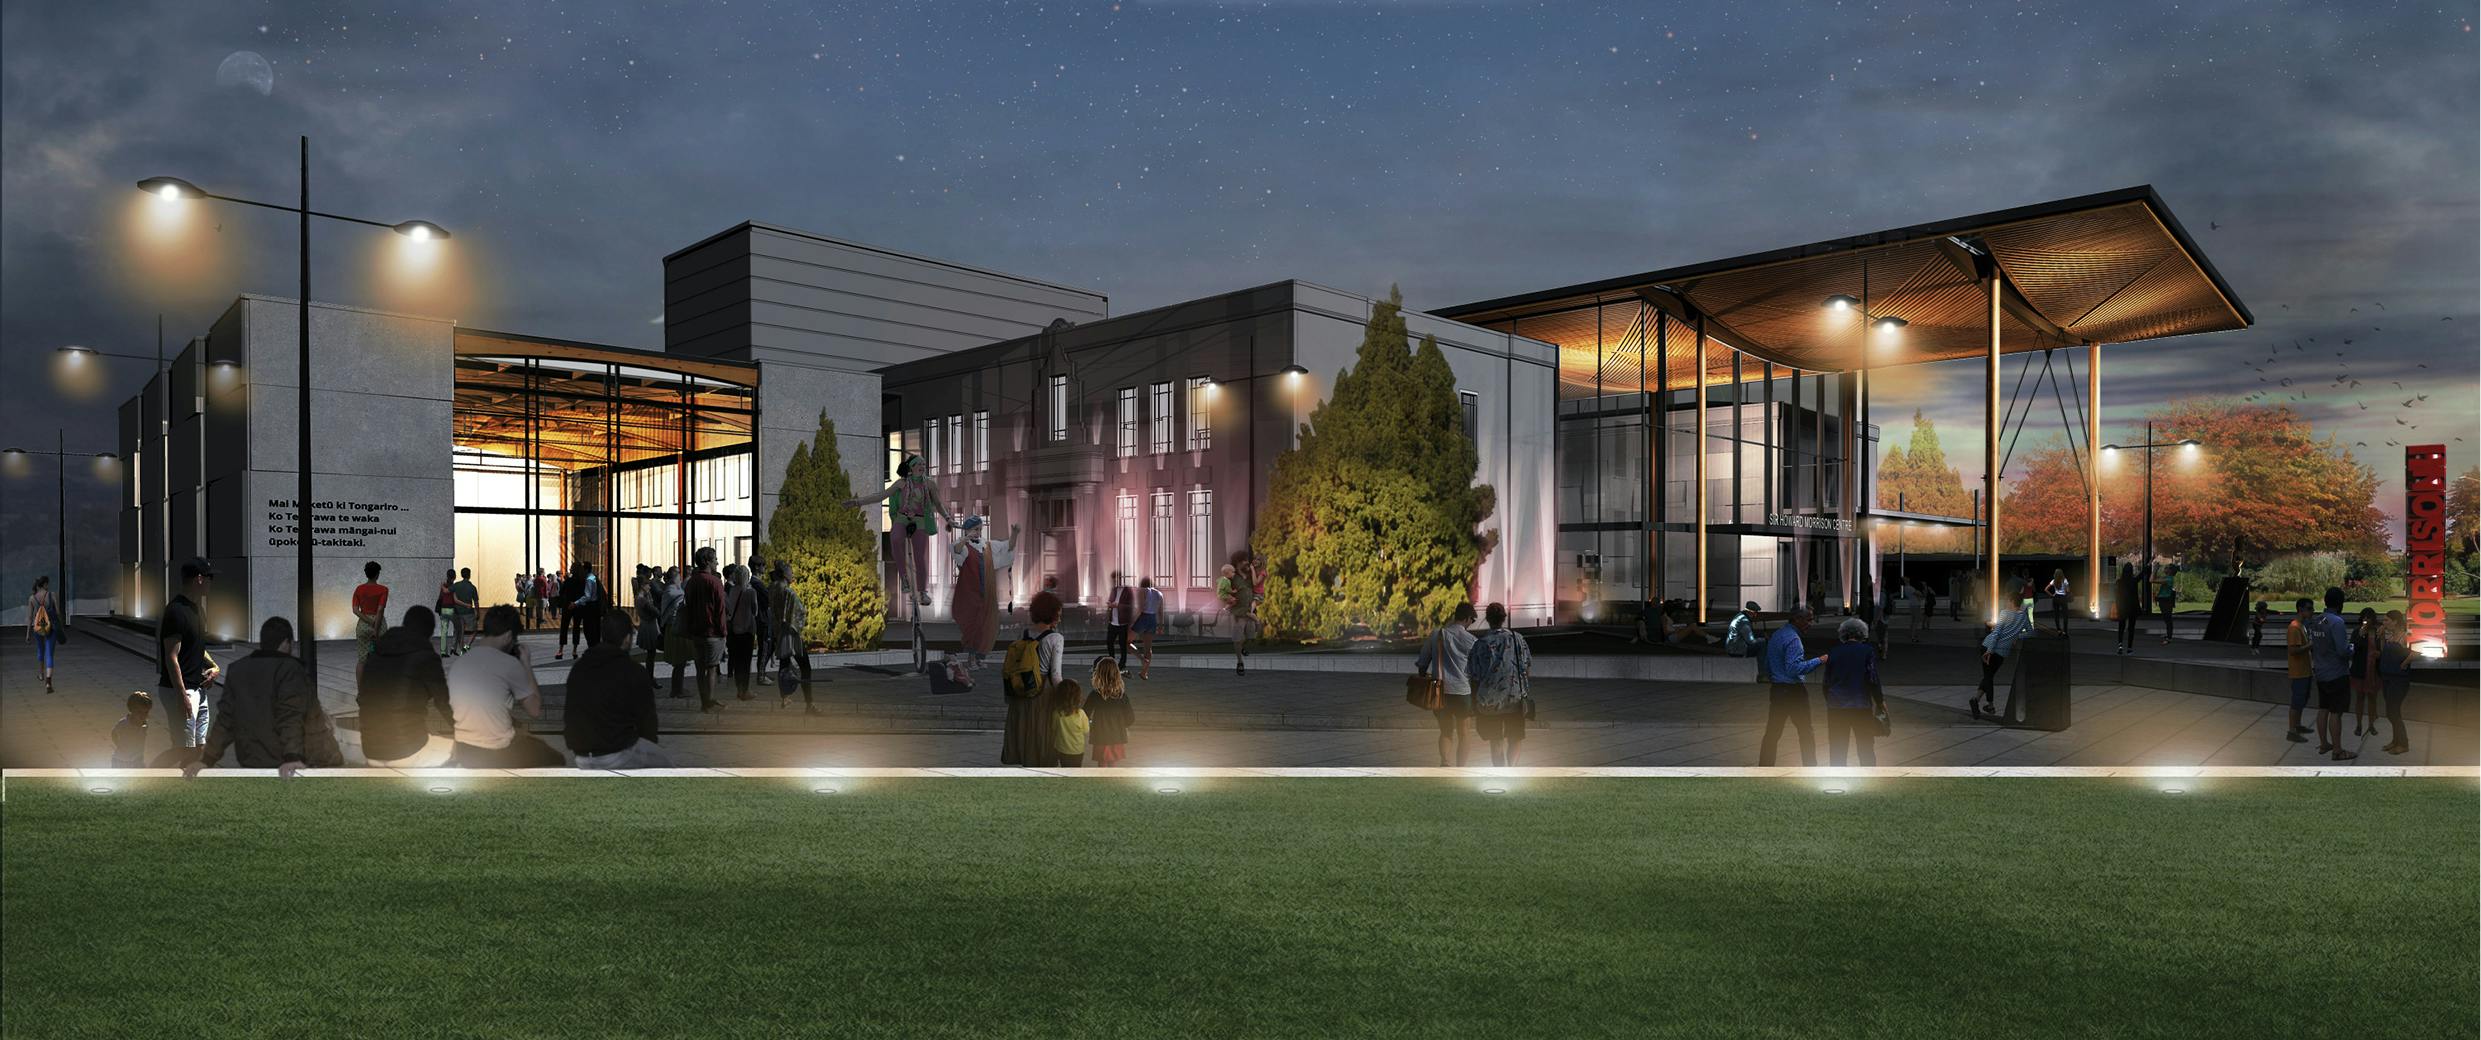 Artists Impression Of The Sir Howard Morrison Centre By Night Including Option Two Courtesy Of Shand Shelton